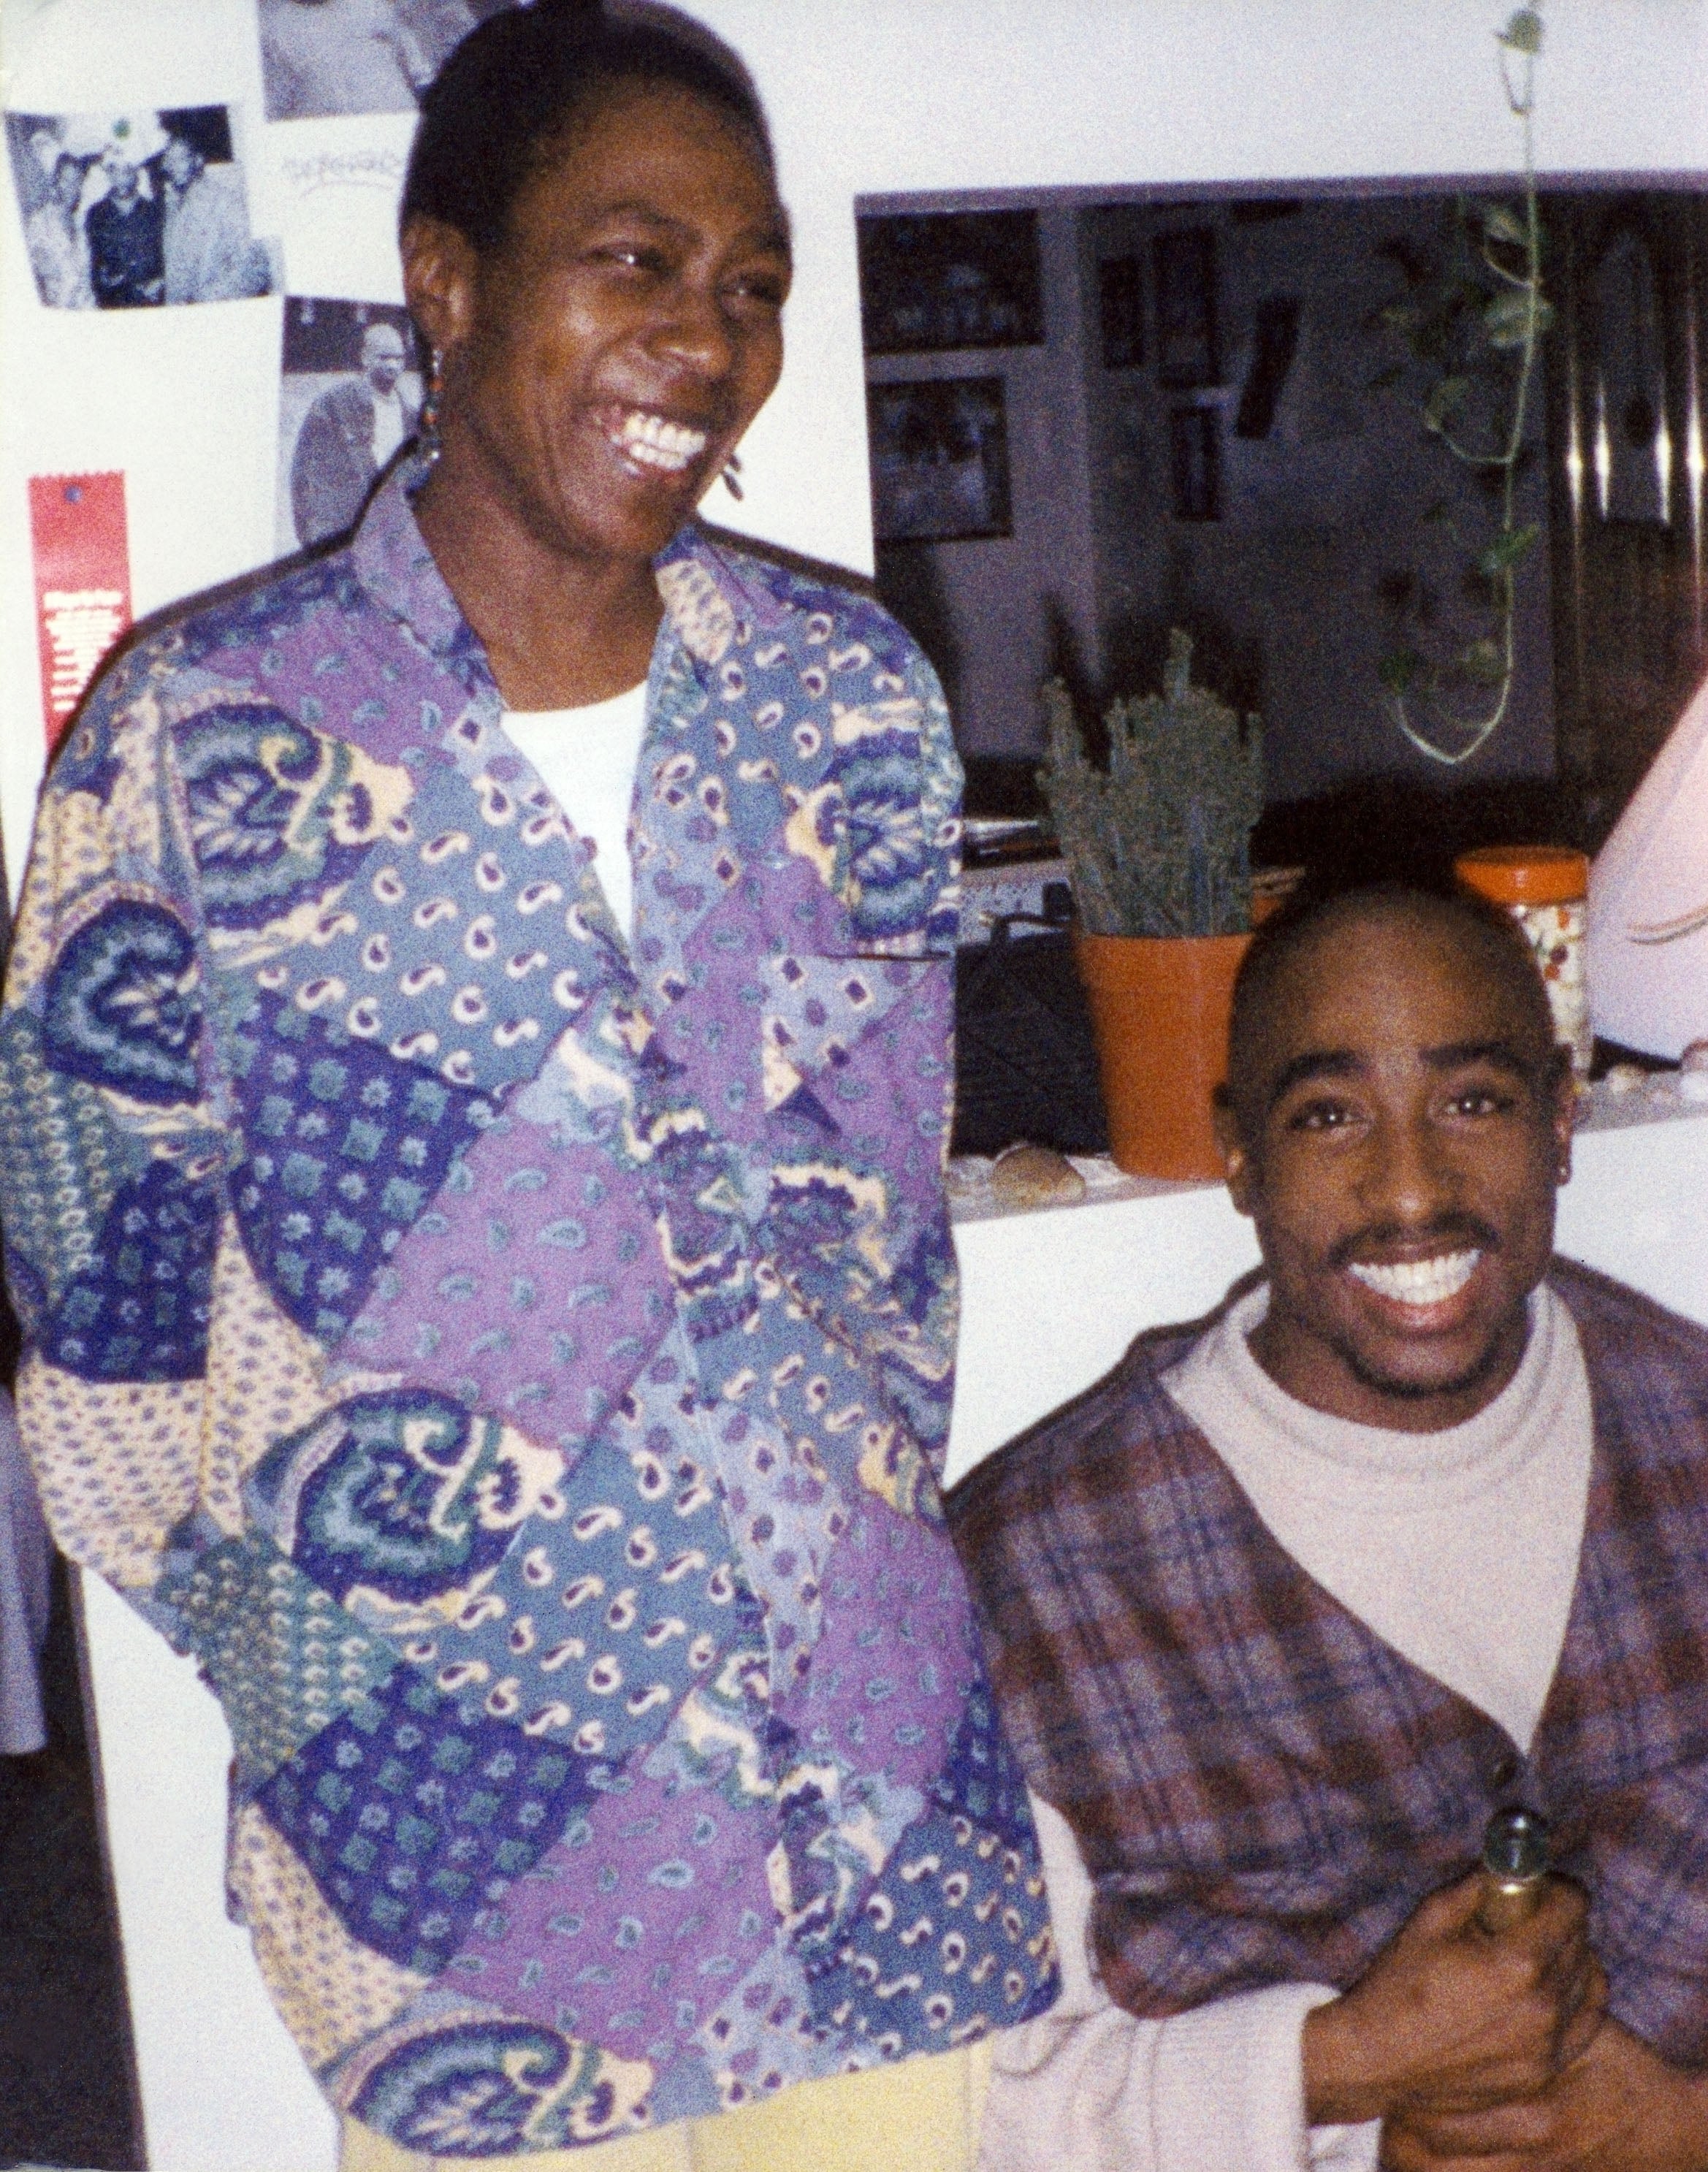 Afeni Shakur and her son, the legendary hip-hop aritst 2pac